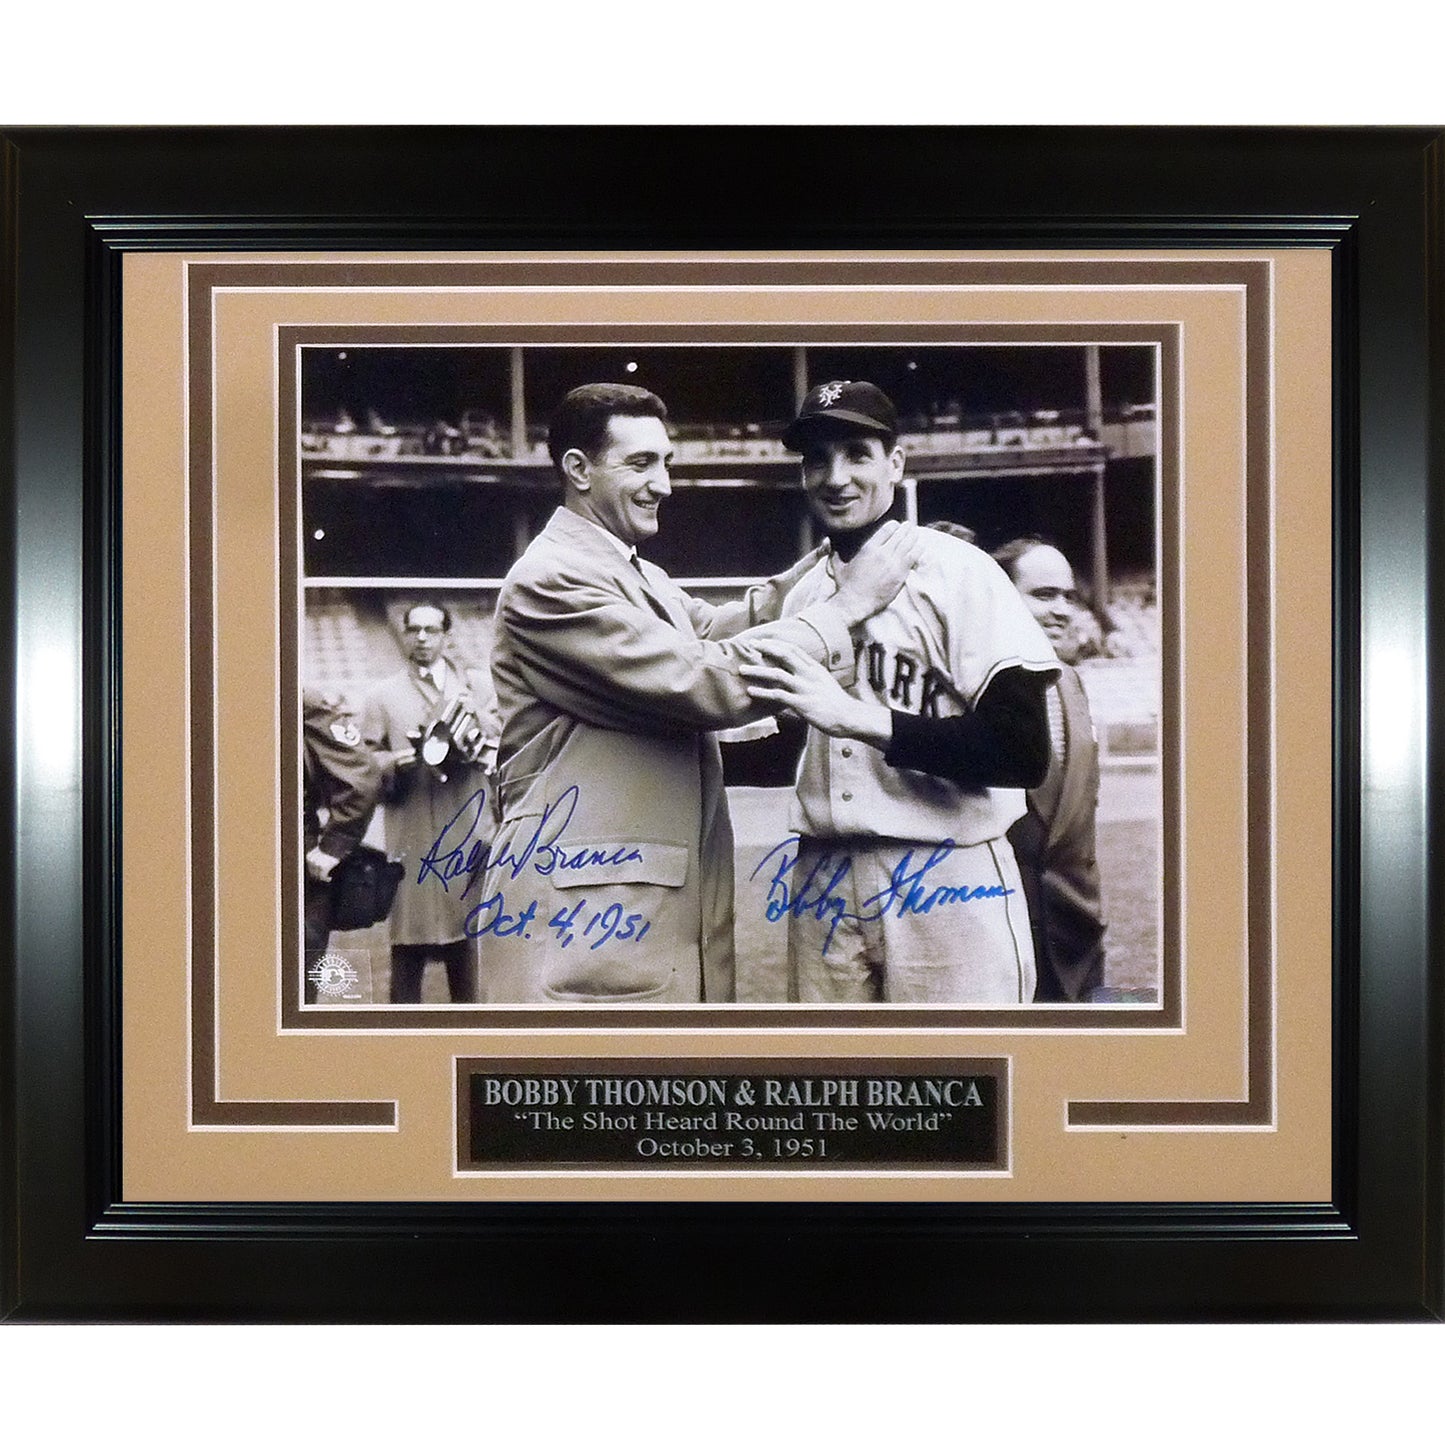 Ralph Branca and Bobby Thomson Dual Autographed "Shot" (Choking) Deluxe Framed 8x10 Photo